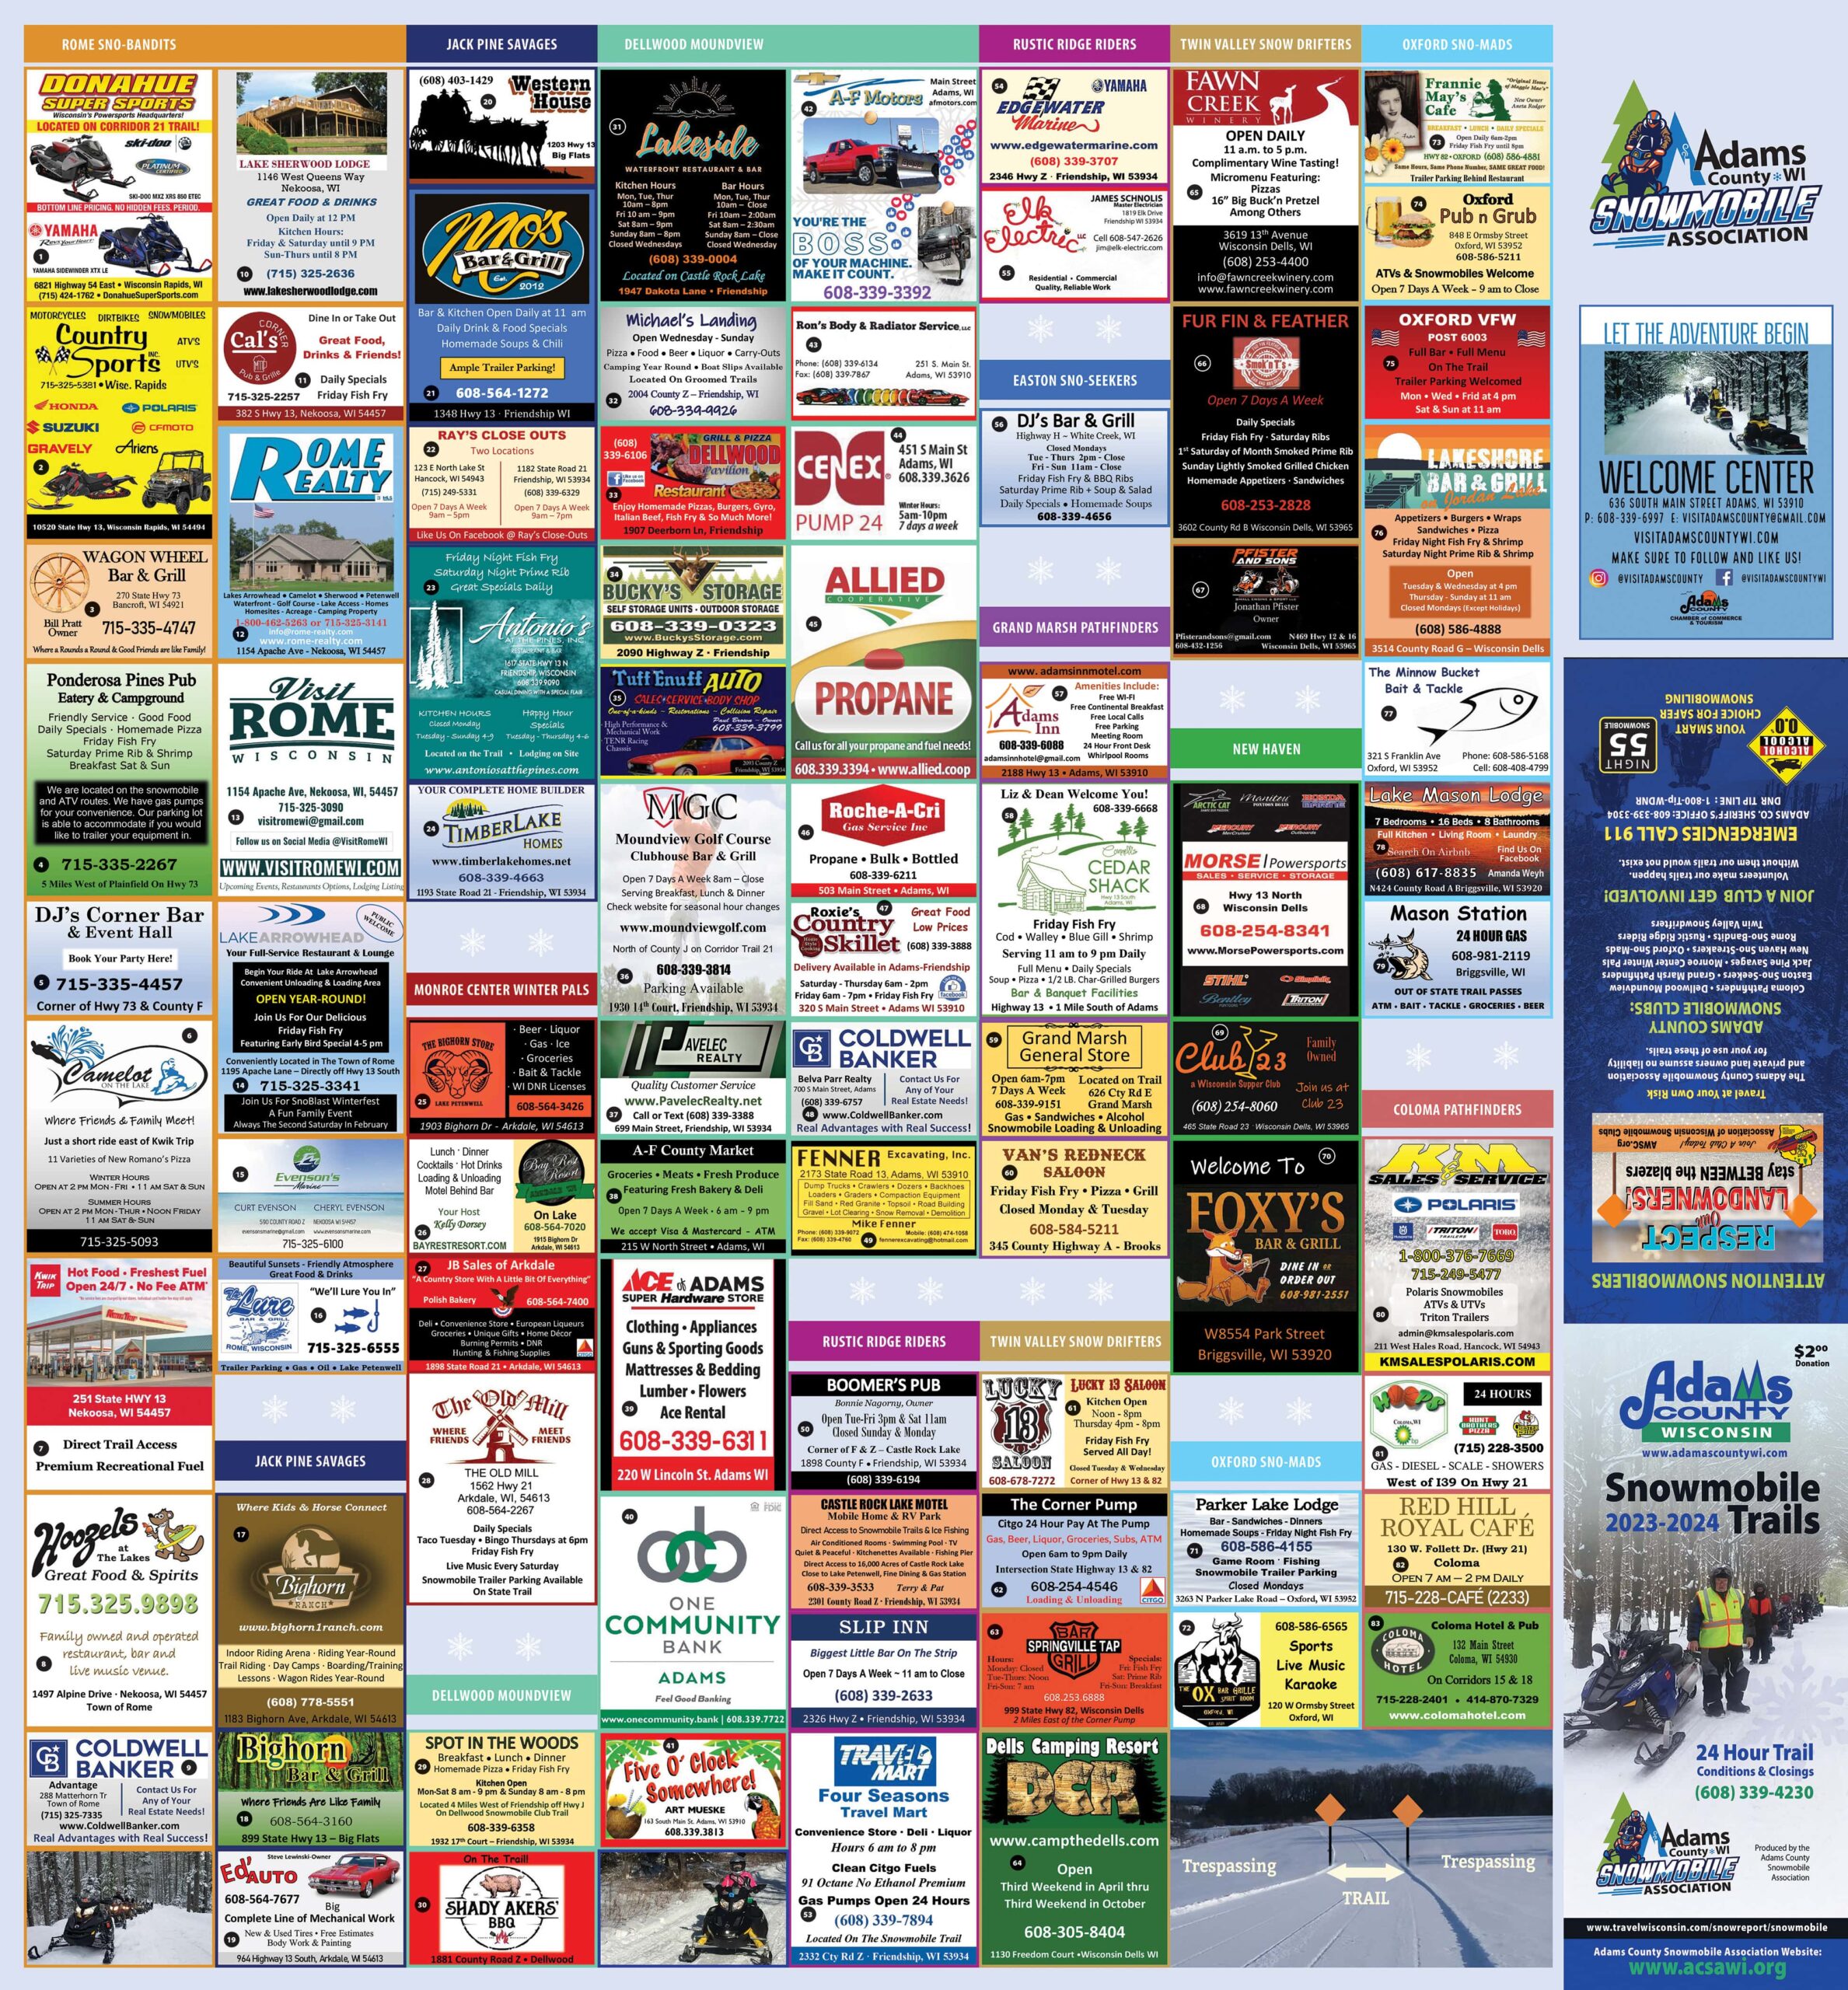 Ads for local businesses